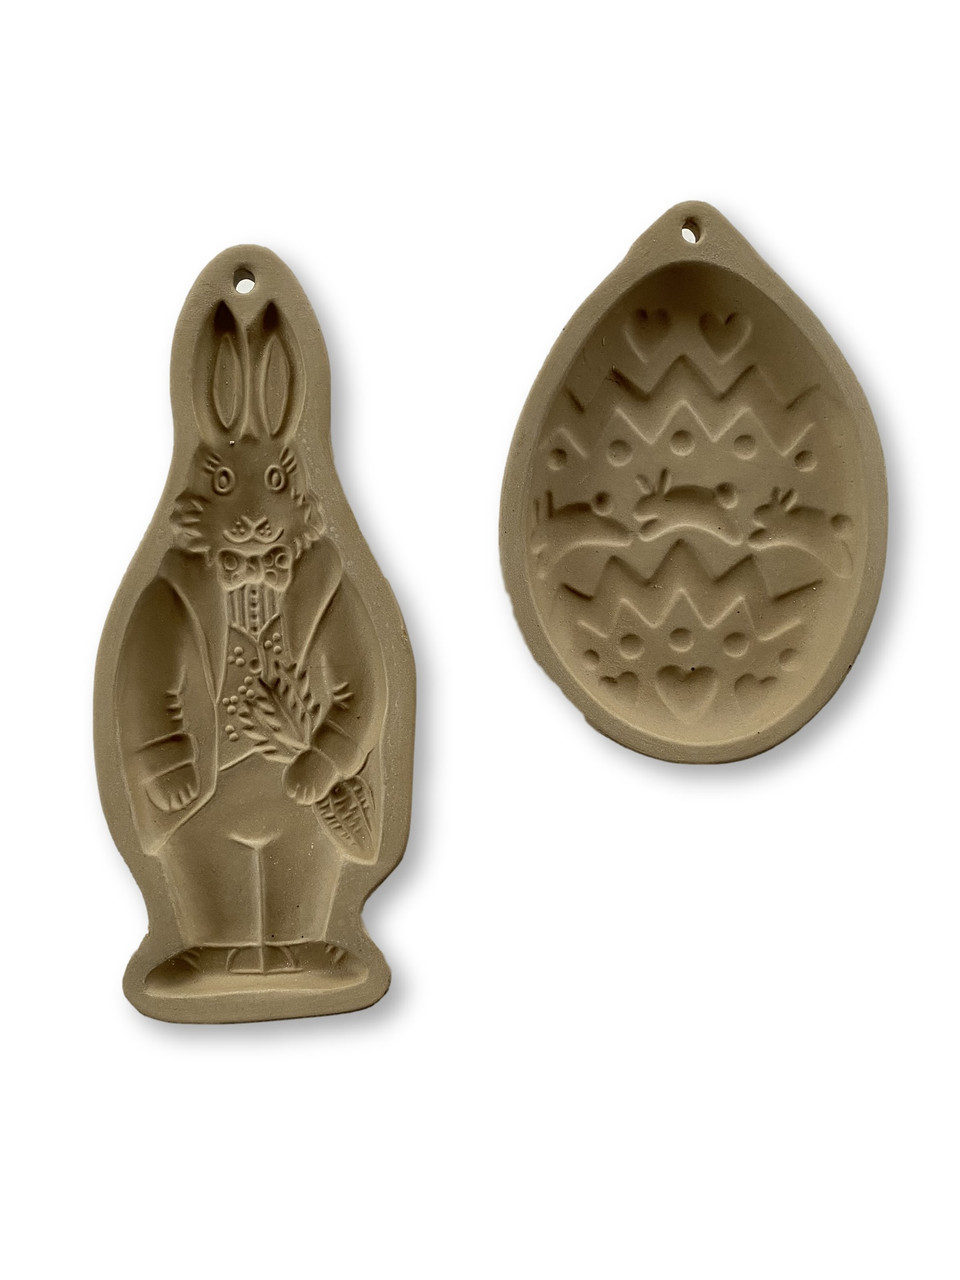 Vintage Brown Bag Cookie Art Hill Design Inc Cookie Mold Stamp - Juggling  Rabbit 1993 - Retired,stoneware, Easter Bunny, Country Chic